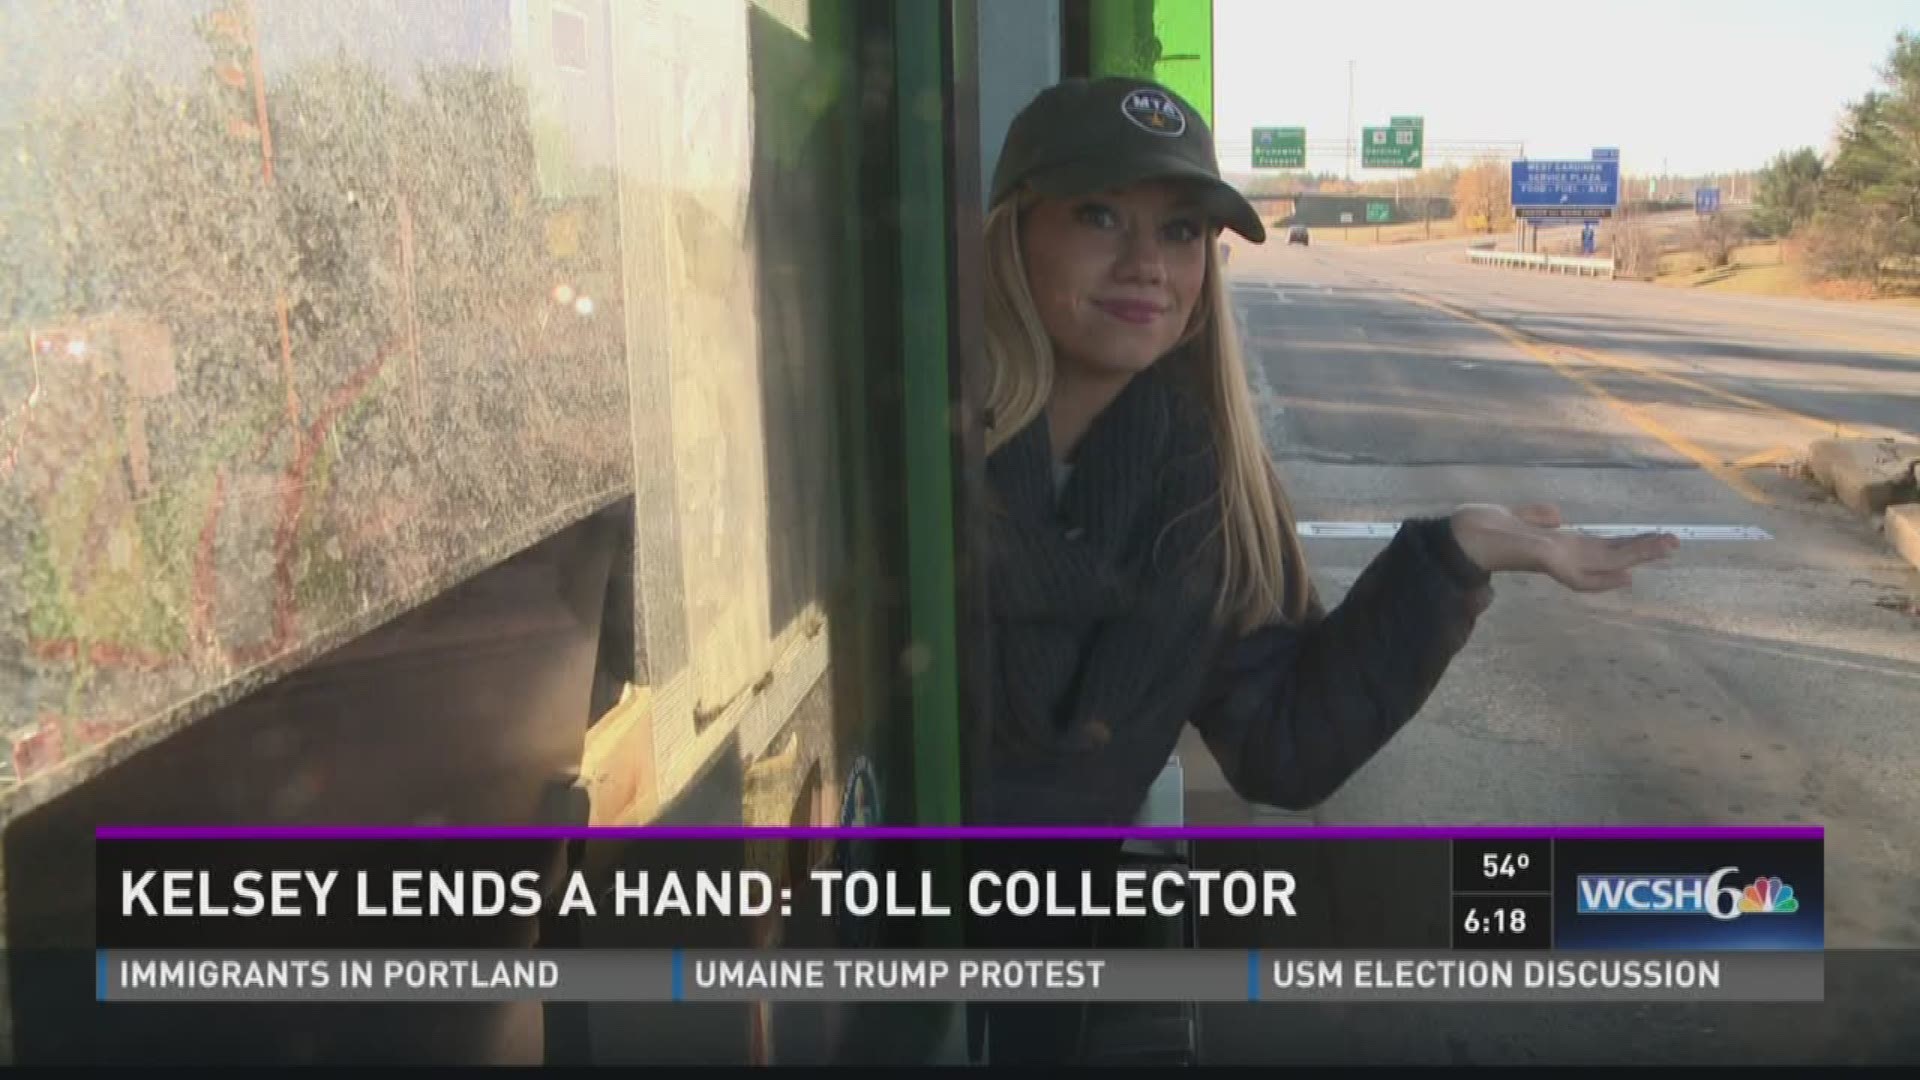 Kelsey lends a hand: Toll collector